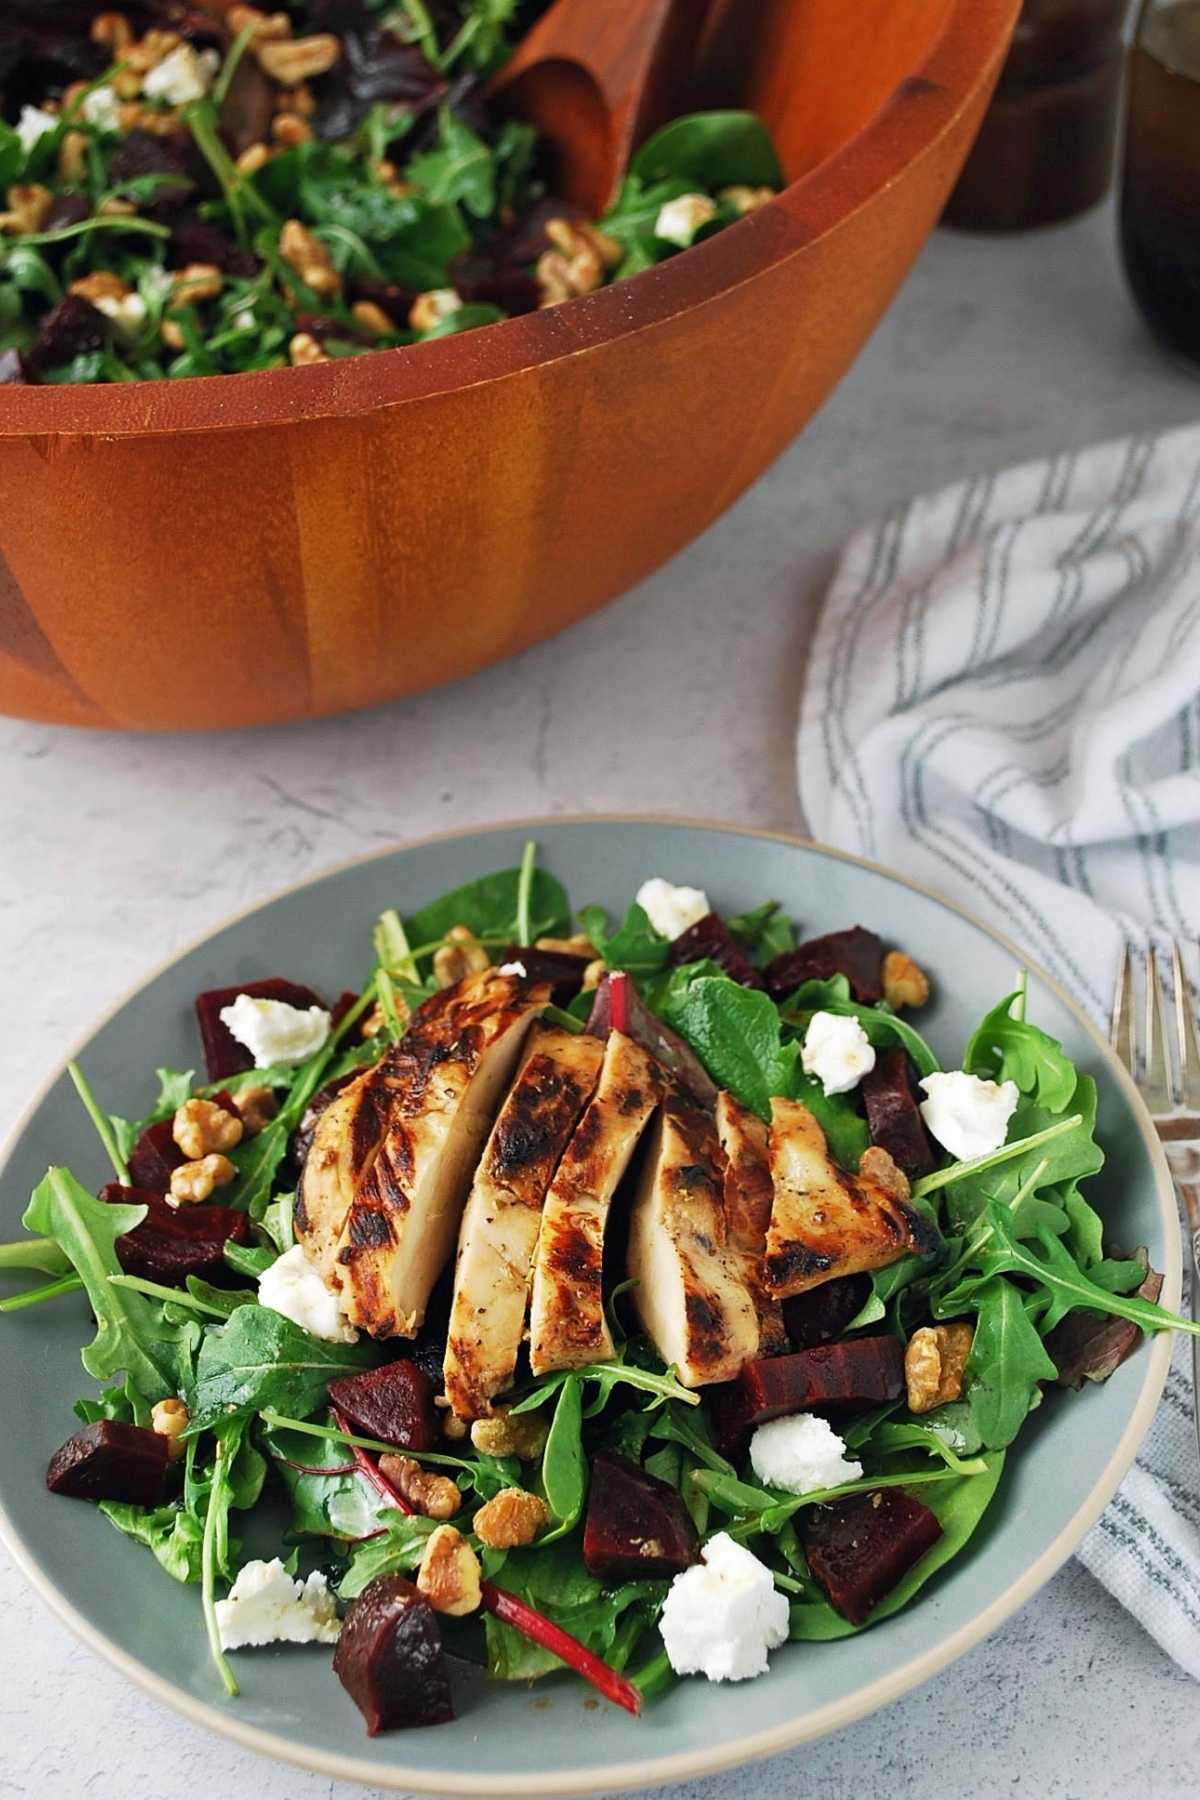 A mixed green salad topped with beets, goat cheese, walnuts, and grilled chicken on a plate with a salad bowl and napkin in the background